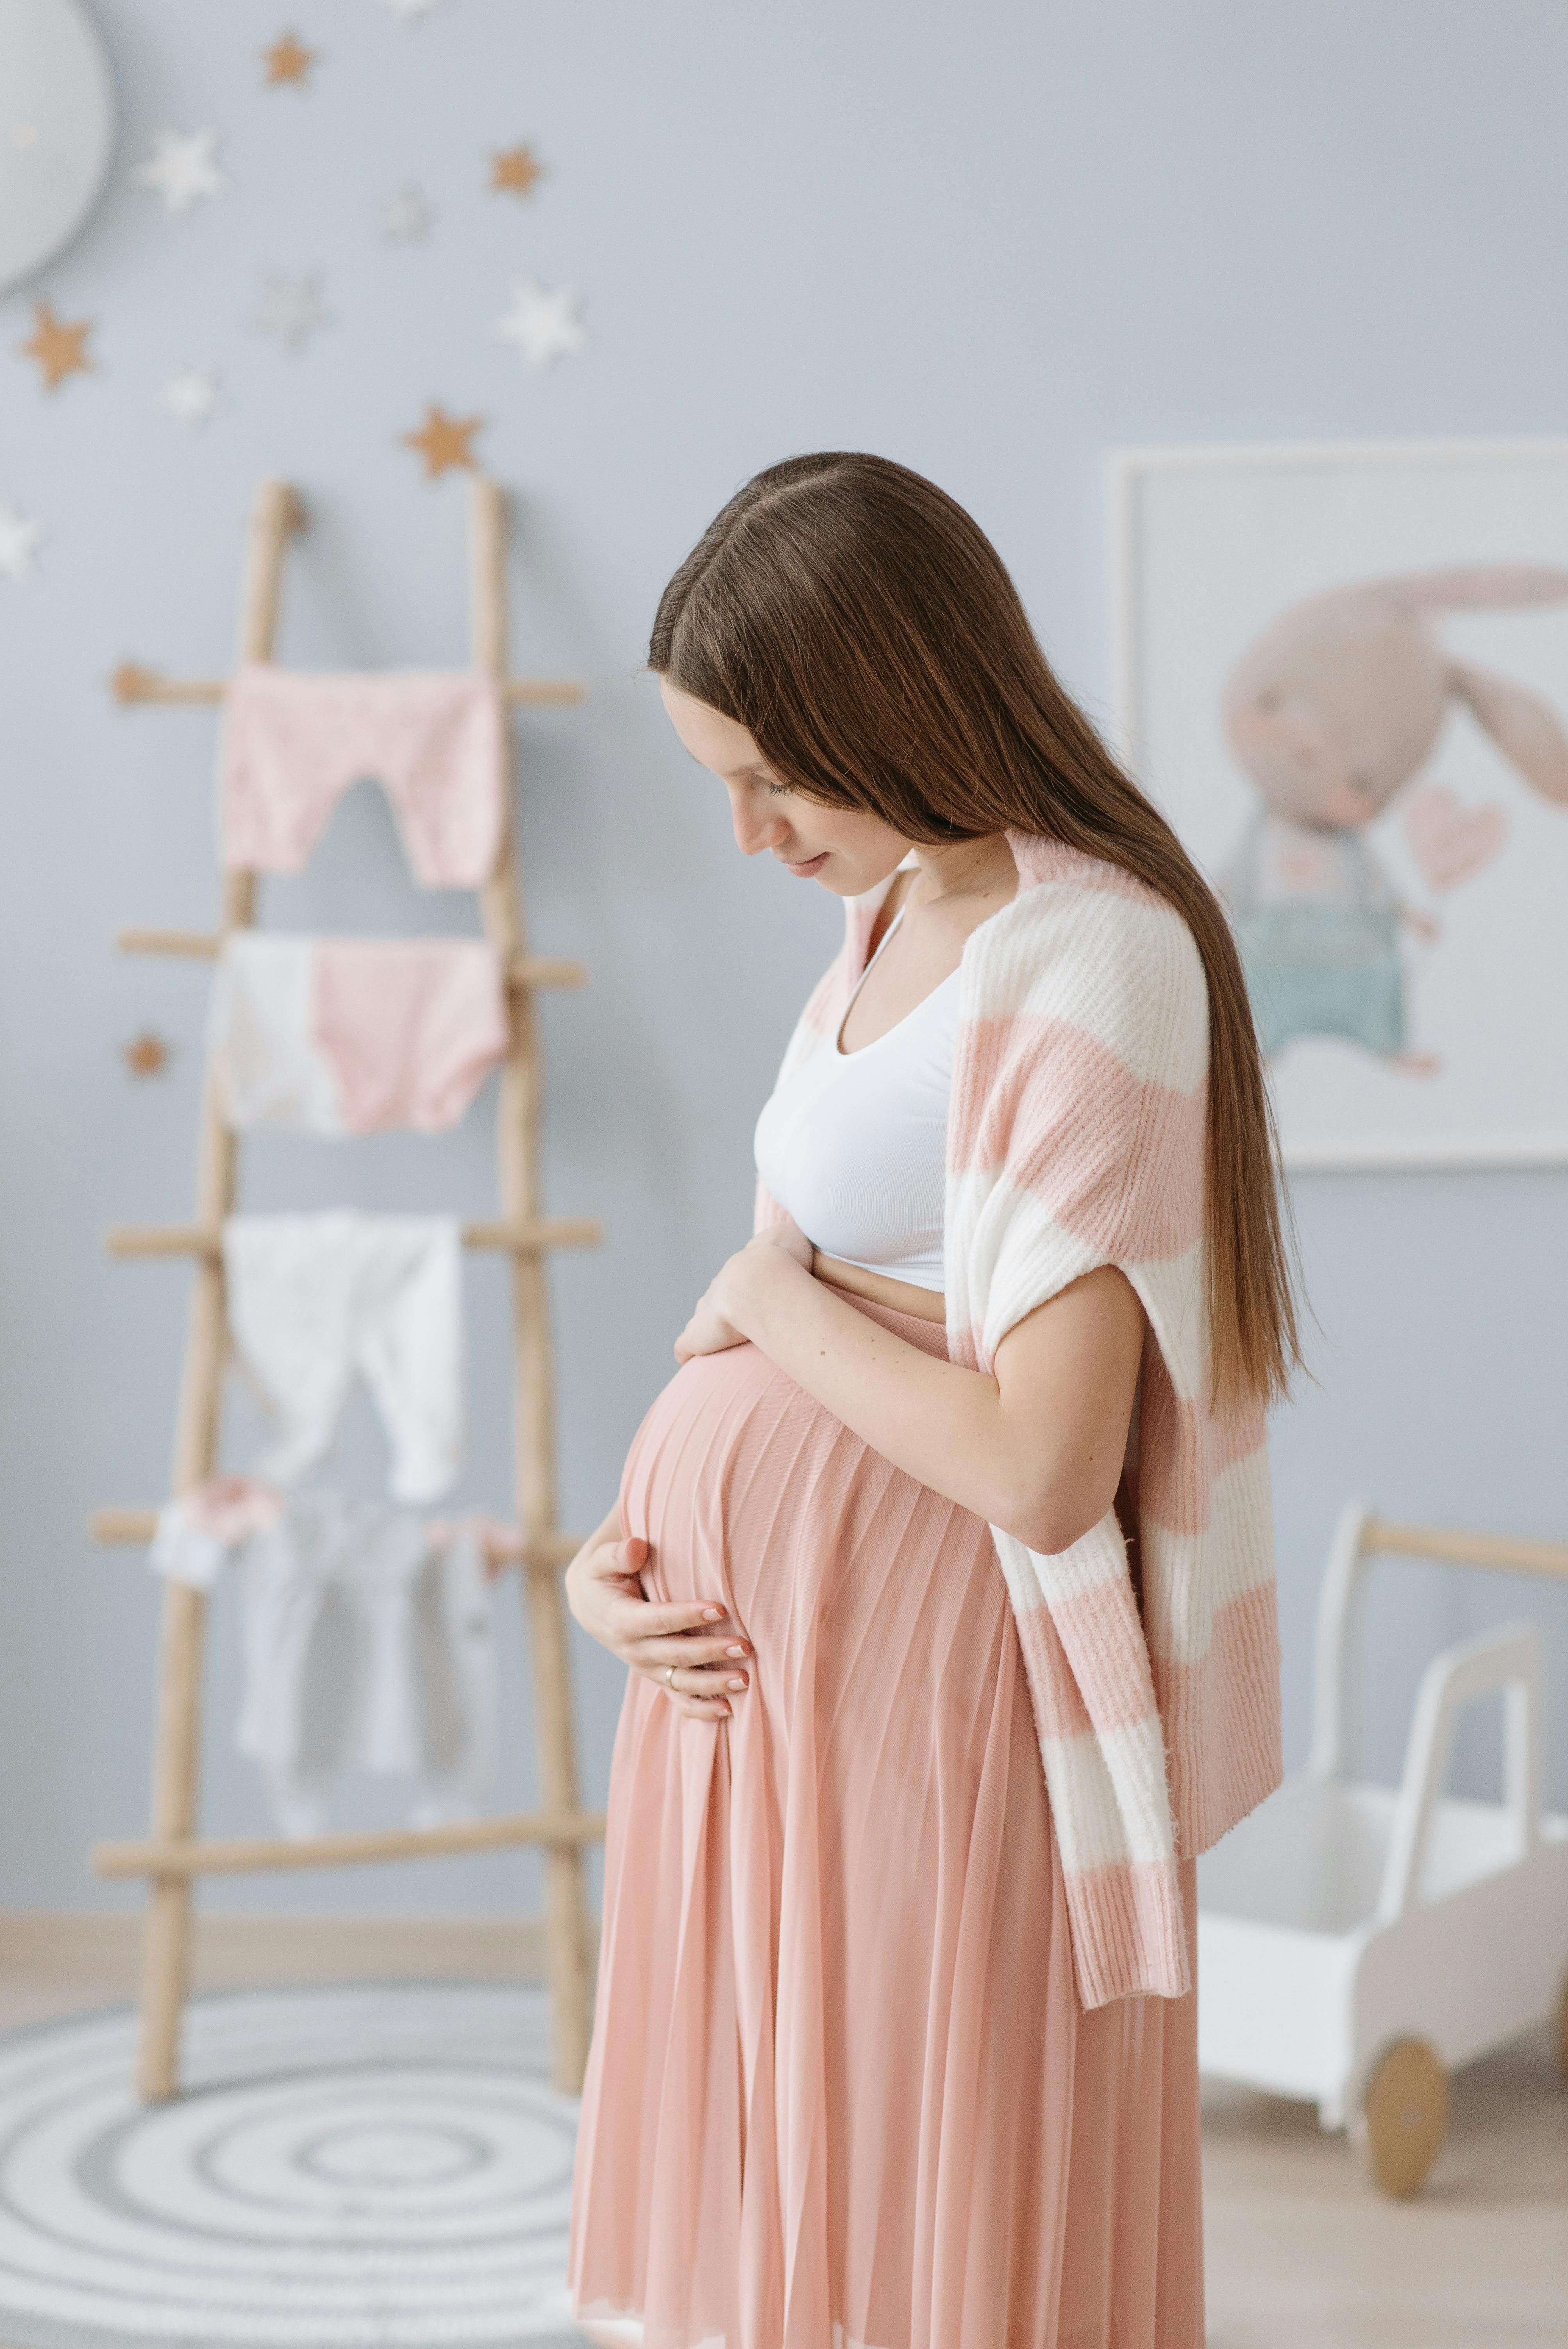 A pregnant woman holding her belly in her upcoming baby's room | Source: Pexels